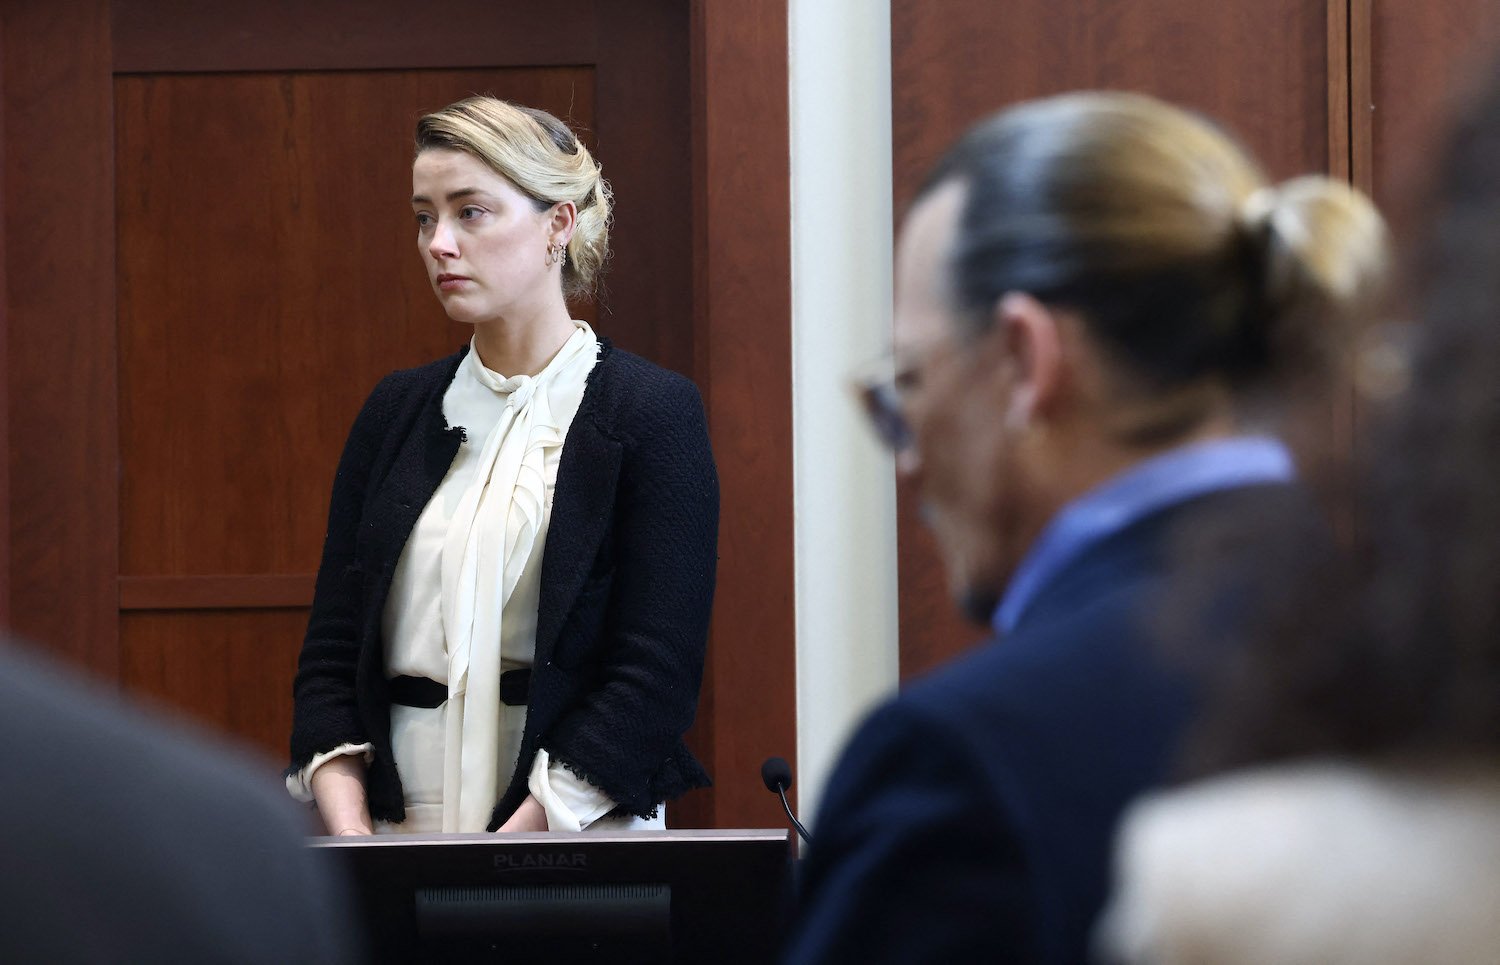 Johnny Depp sits during Amber Heard's testimony during a defamation trial